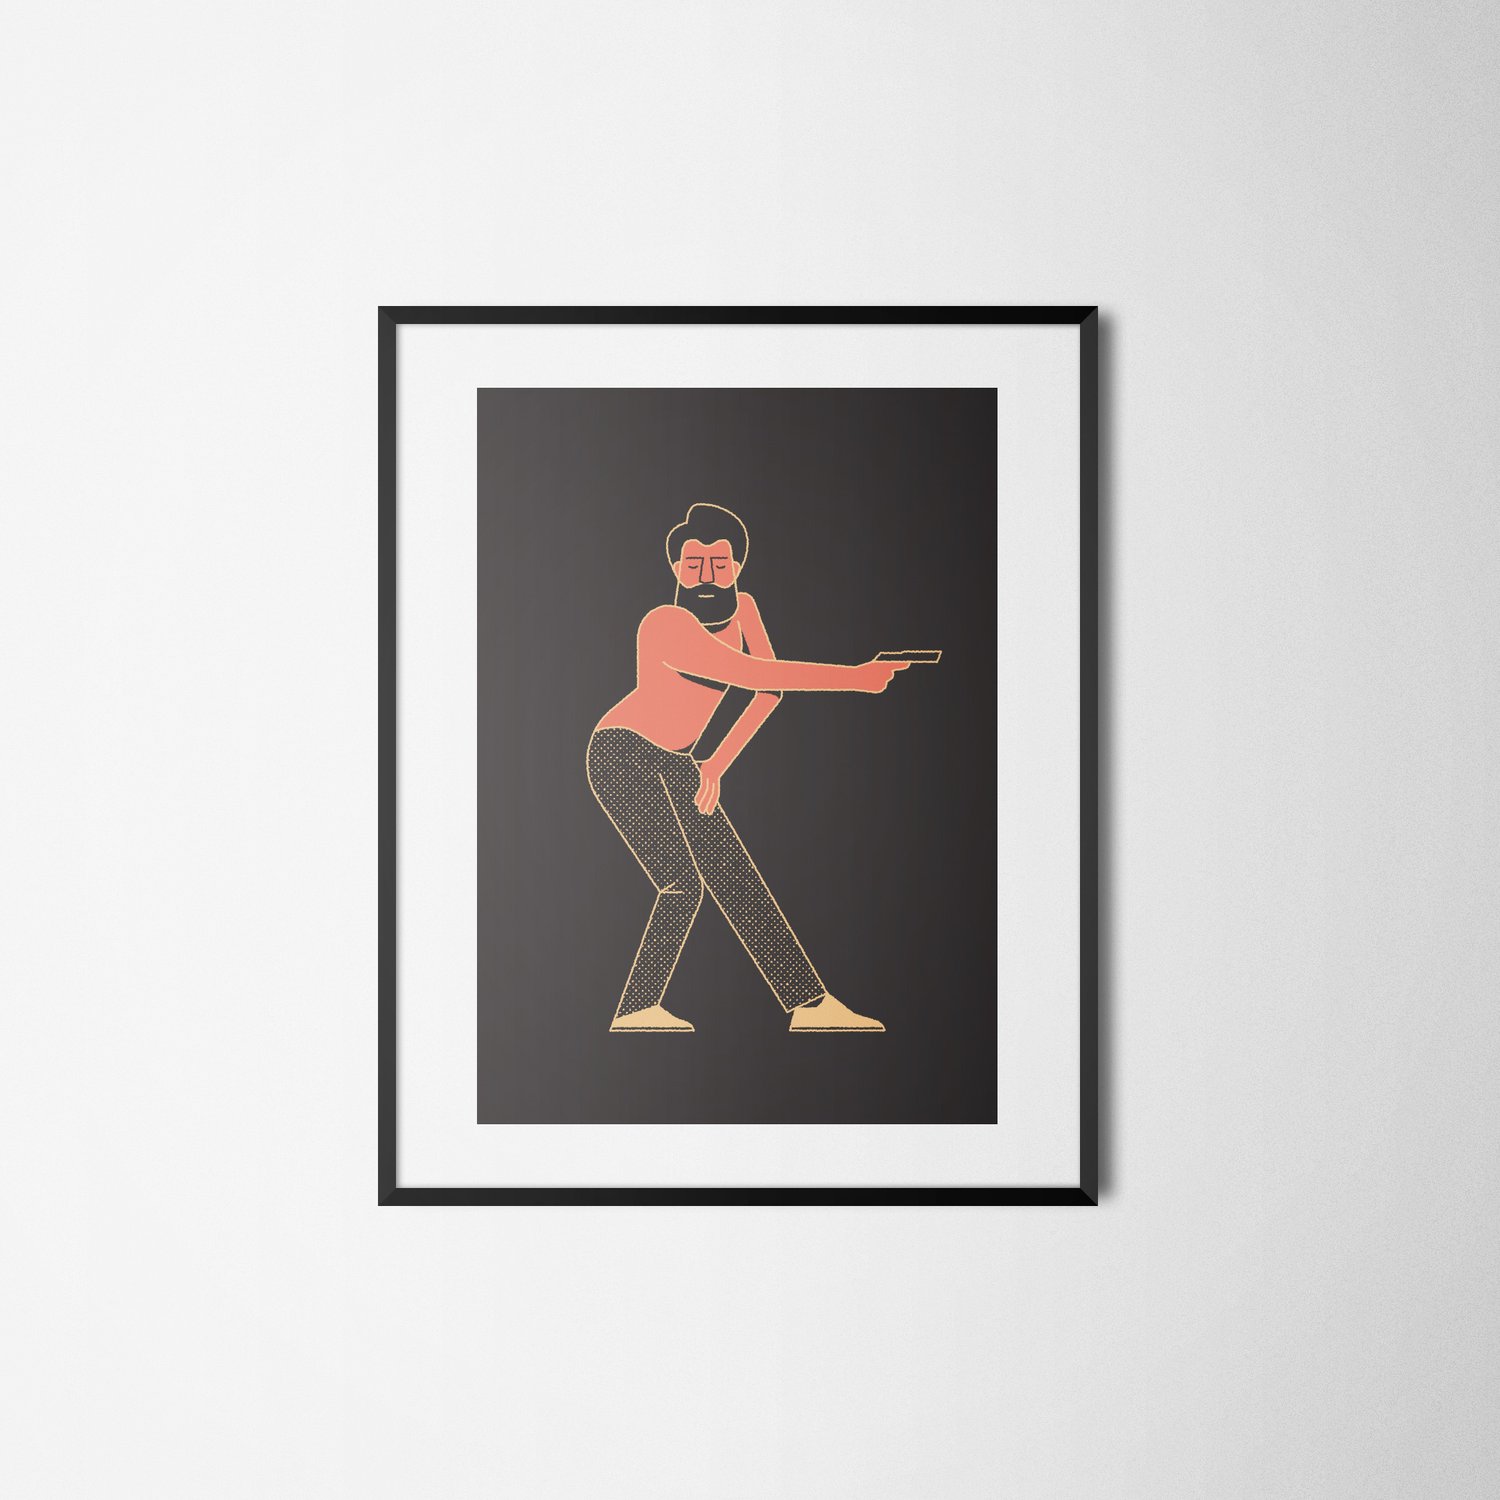 Image of This is Gambino A4/A3 Giclée print